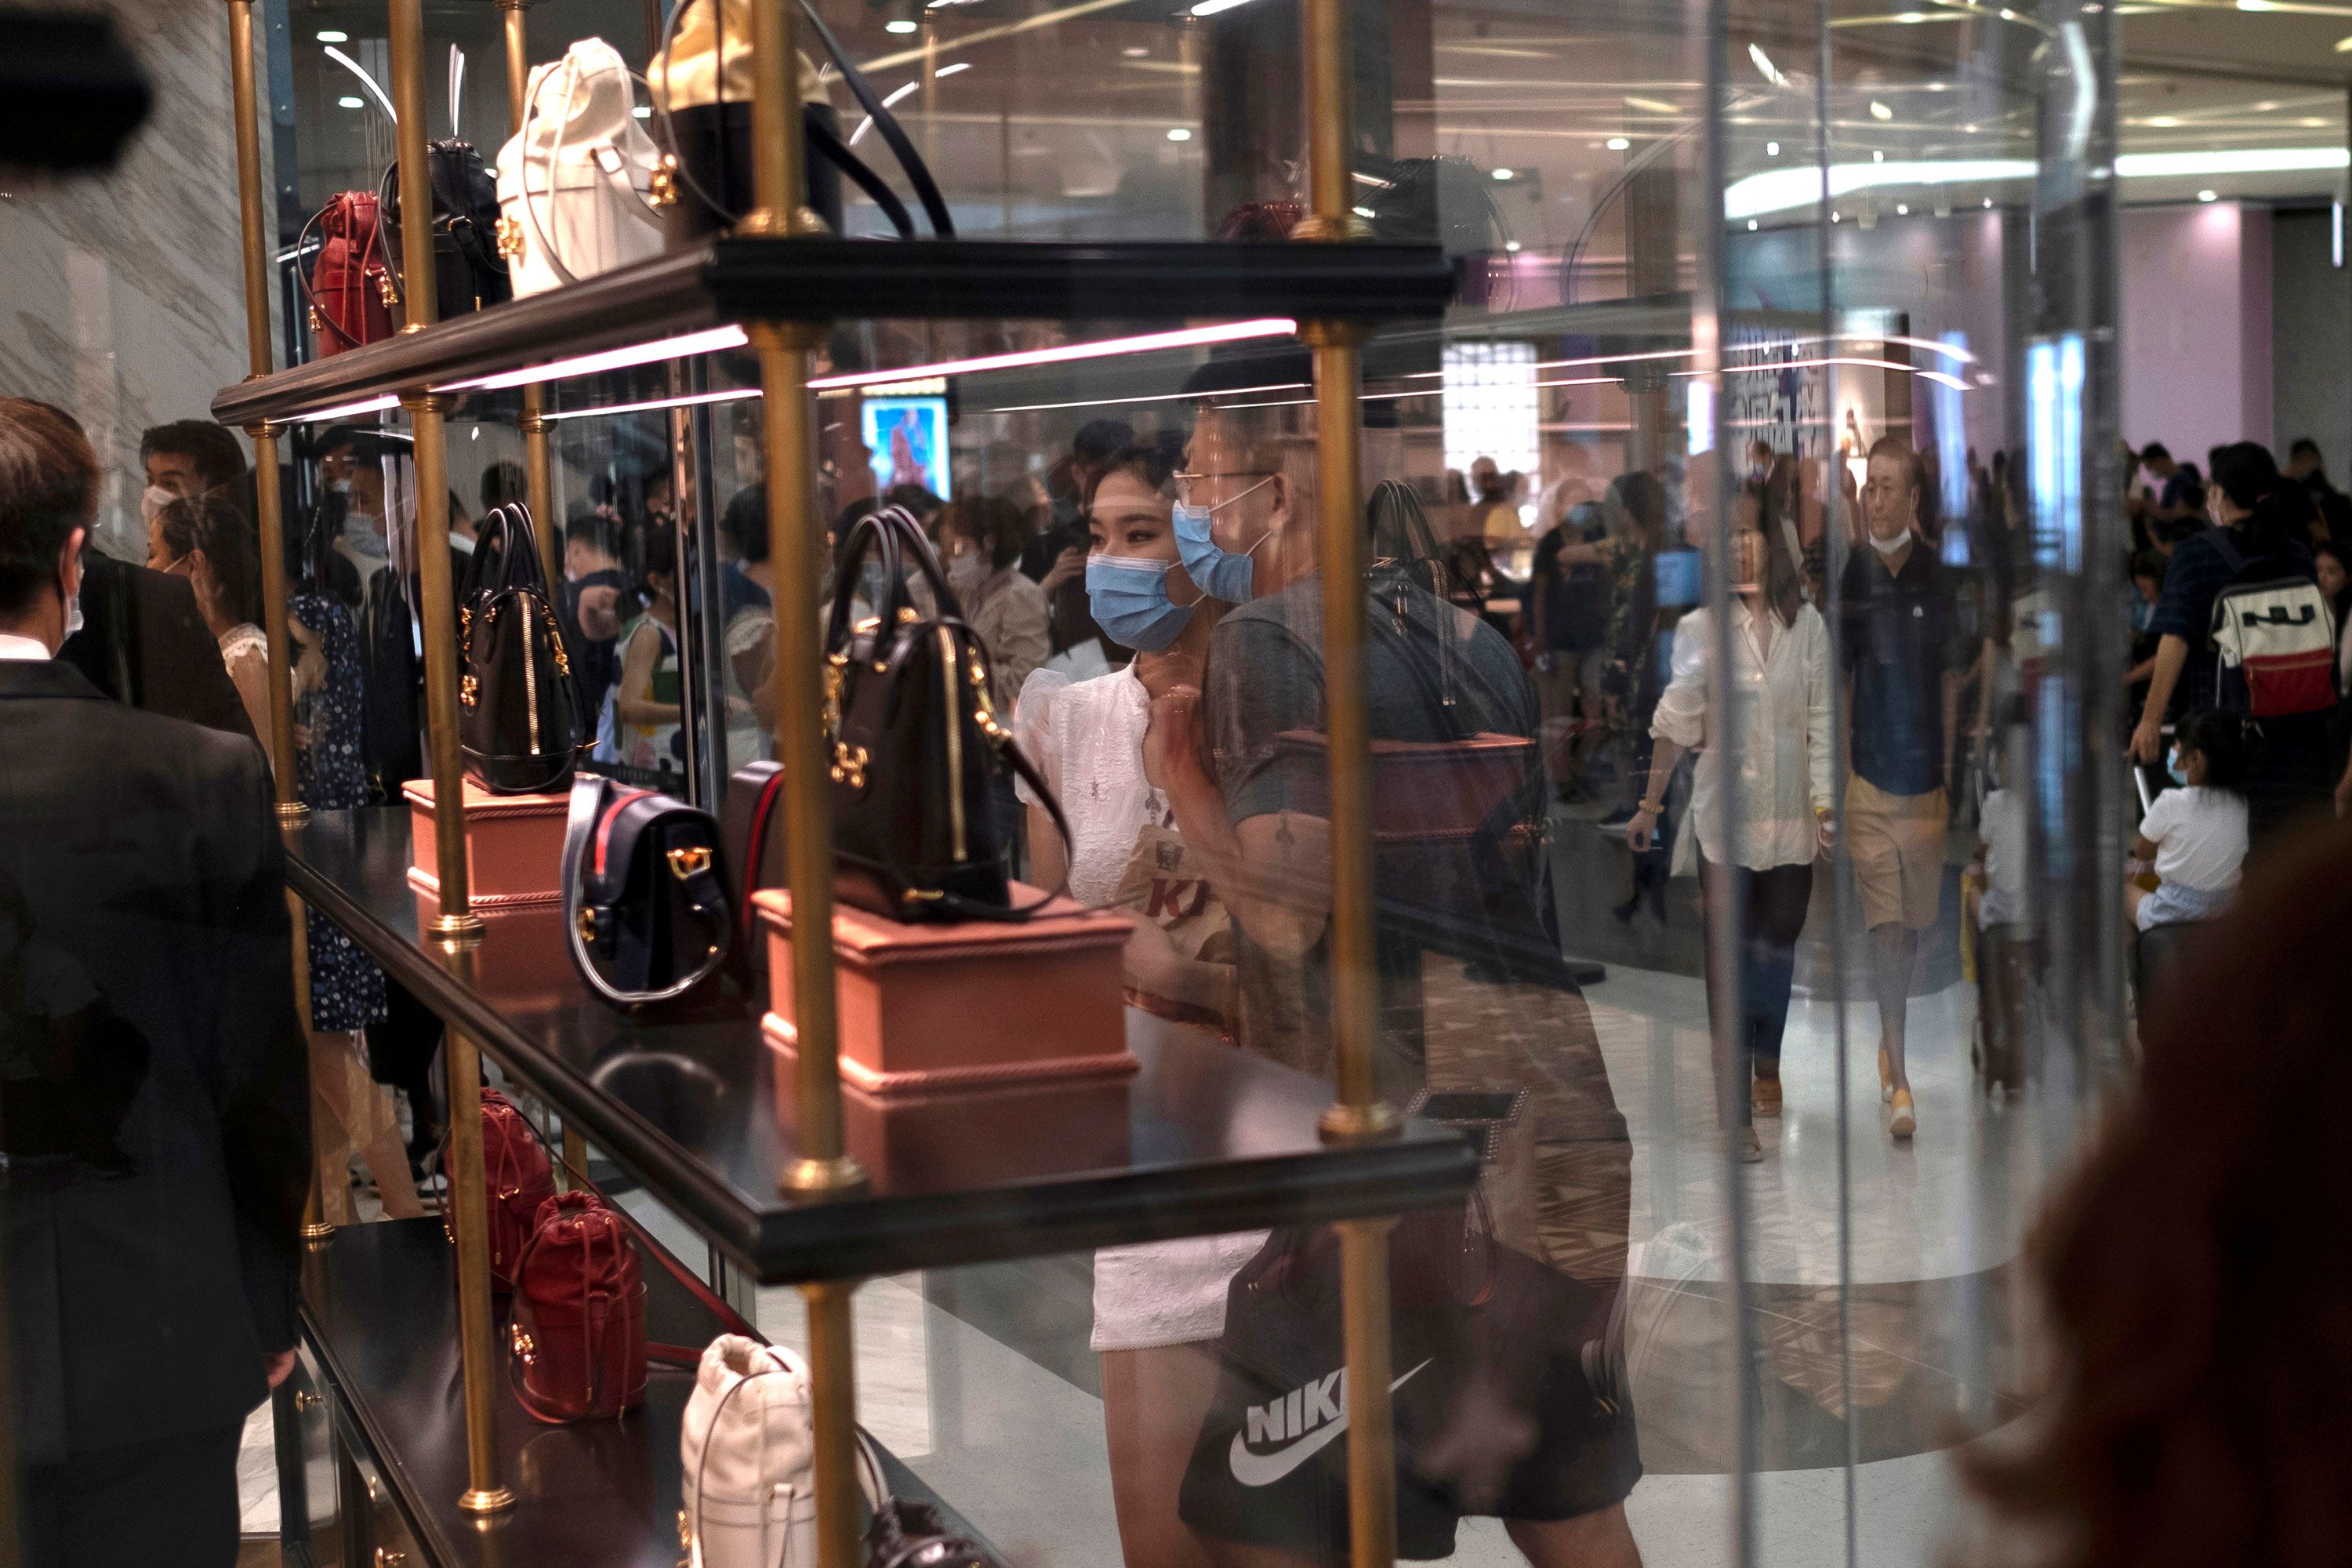 SHANGHAI, CHINA - JANUARY 15, 2021 - A Louis Vuitton store in a